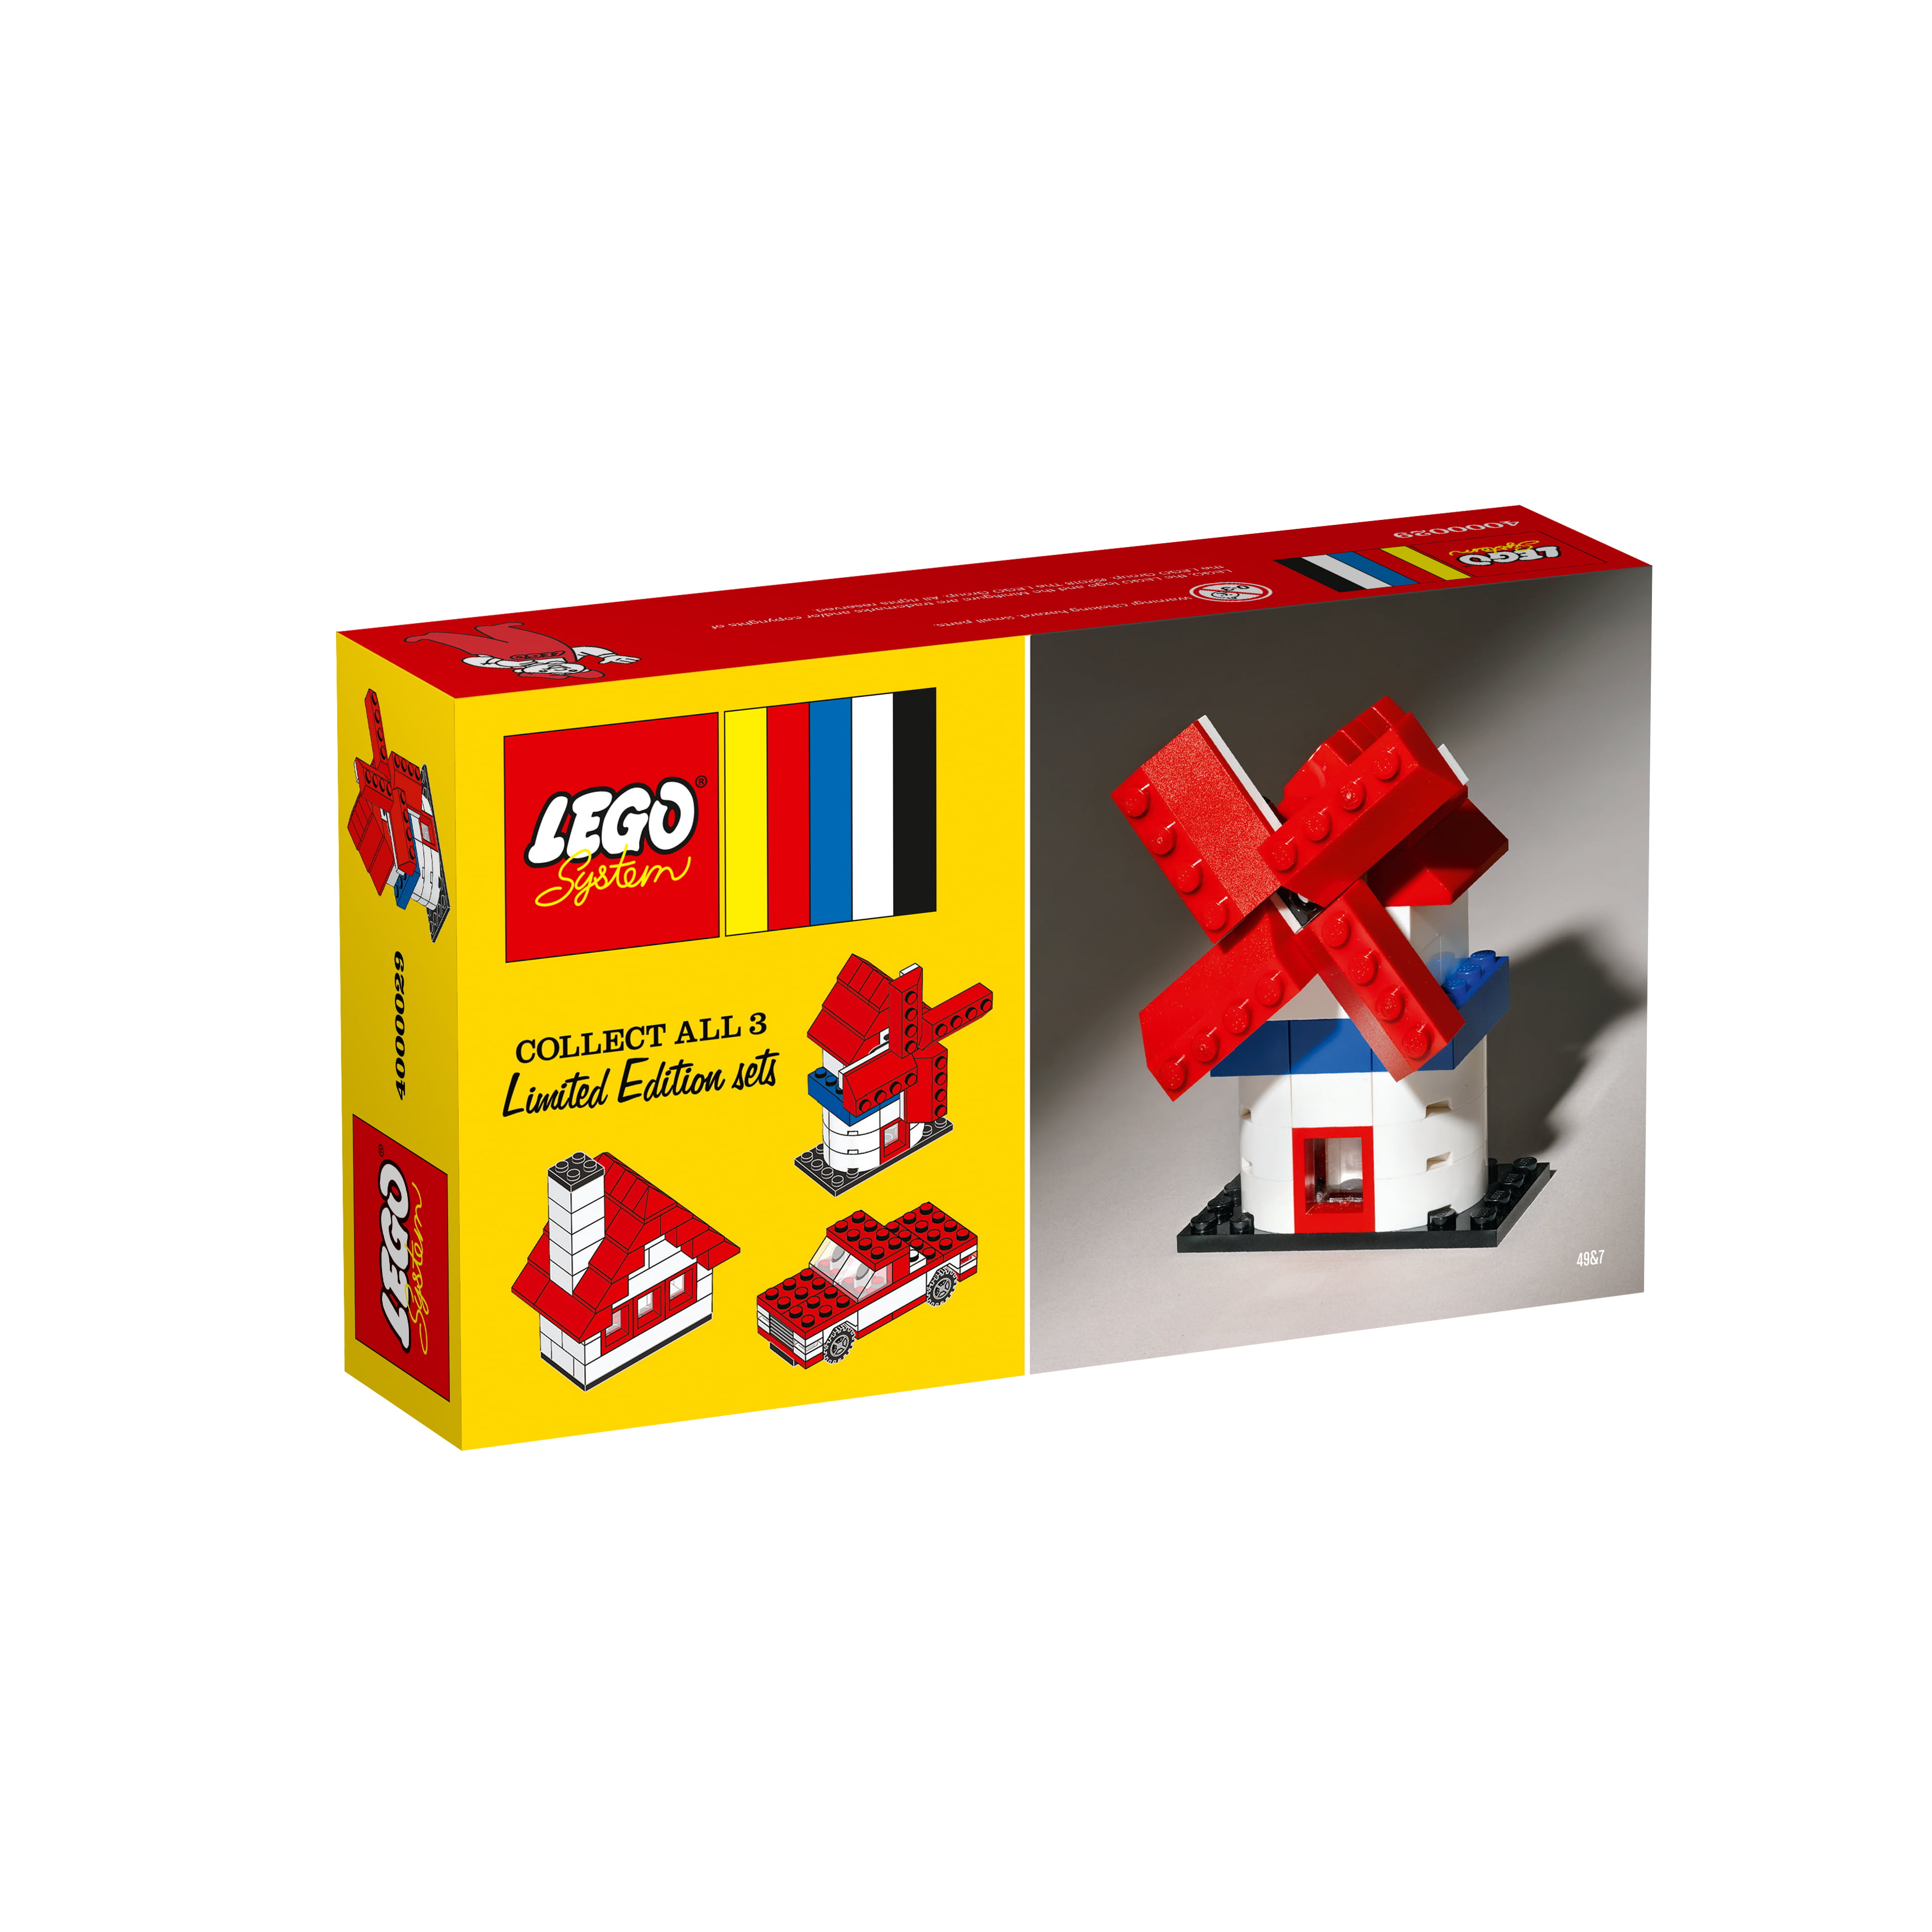 LEGO 4000029 Windmill Classic Set 60th Anniversary Limited Edition for sale online